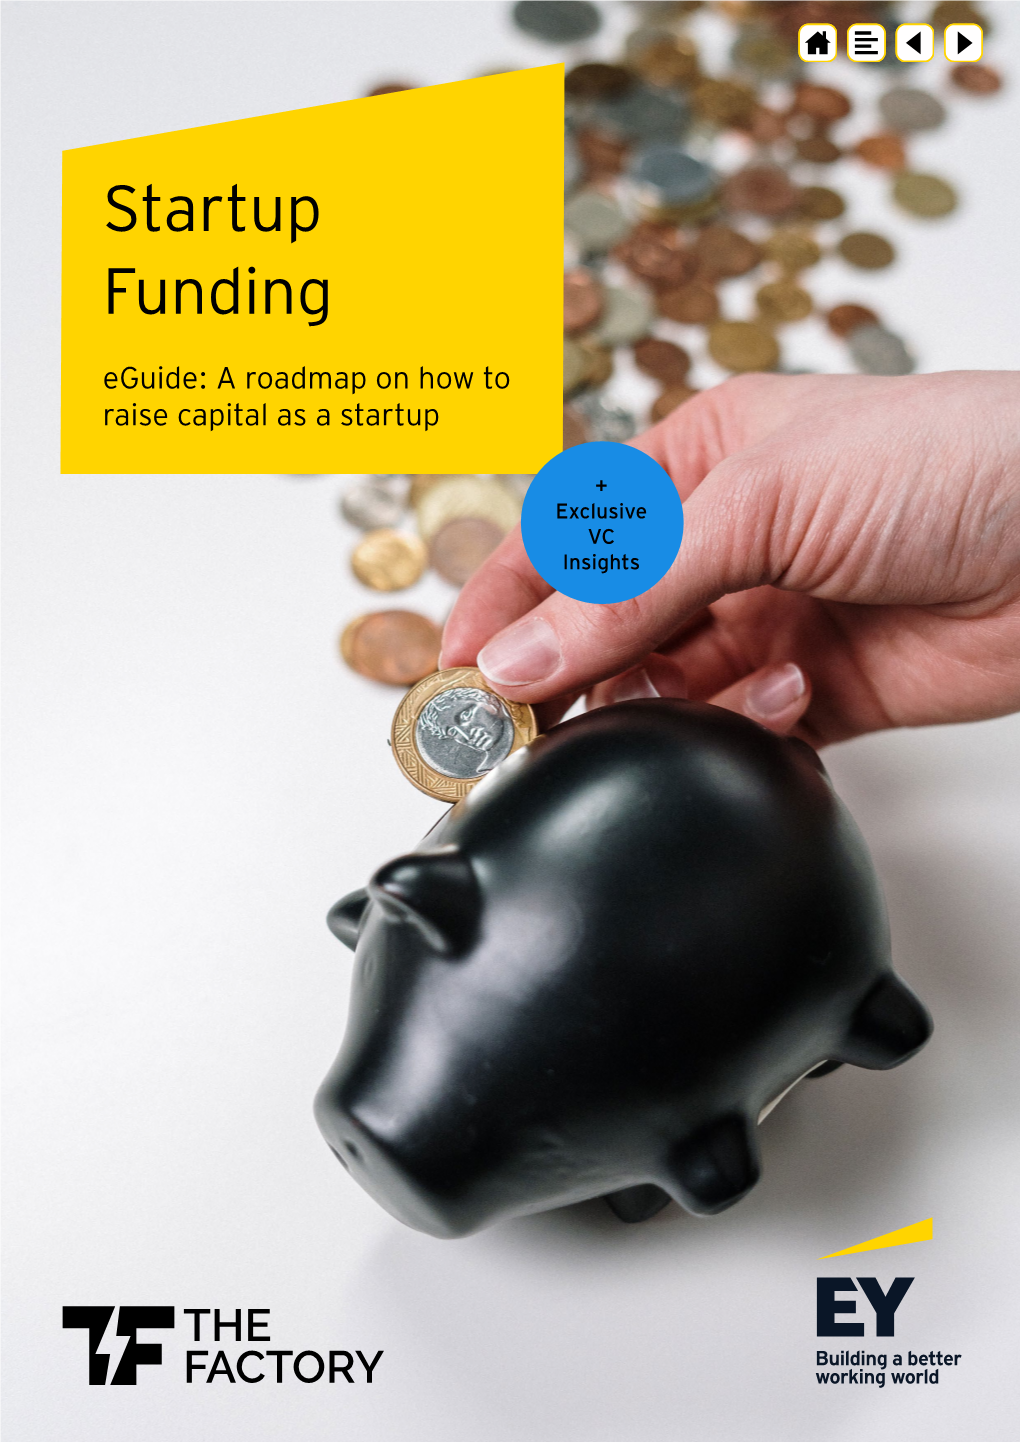 Startup Funding Eguide: a Roadmap on How to Raise Capital As a Startup